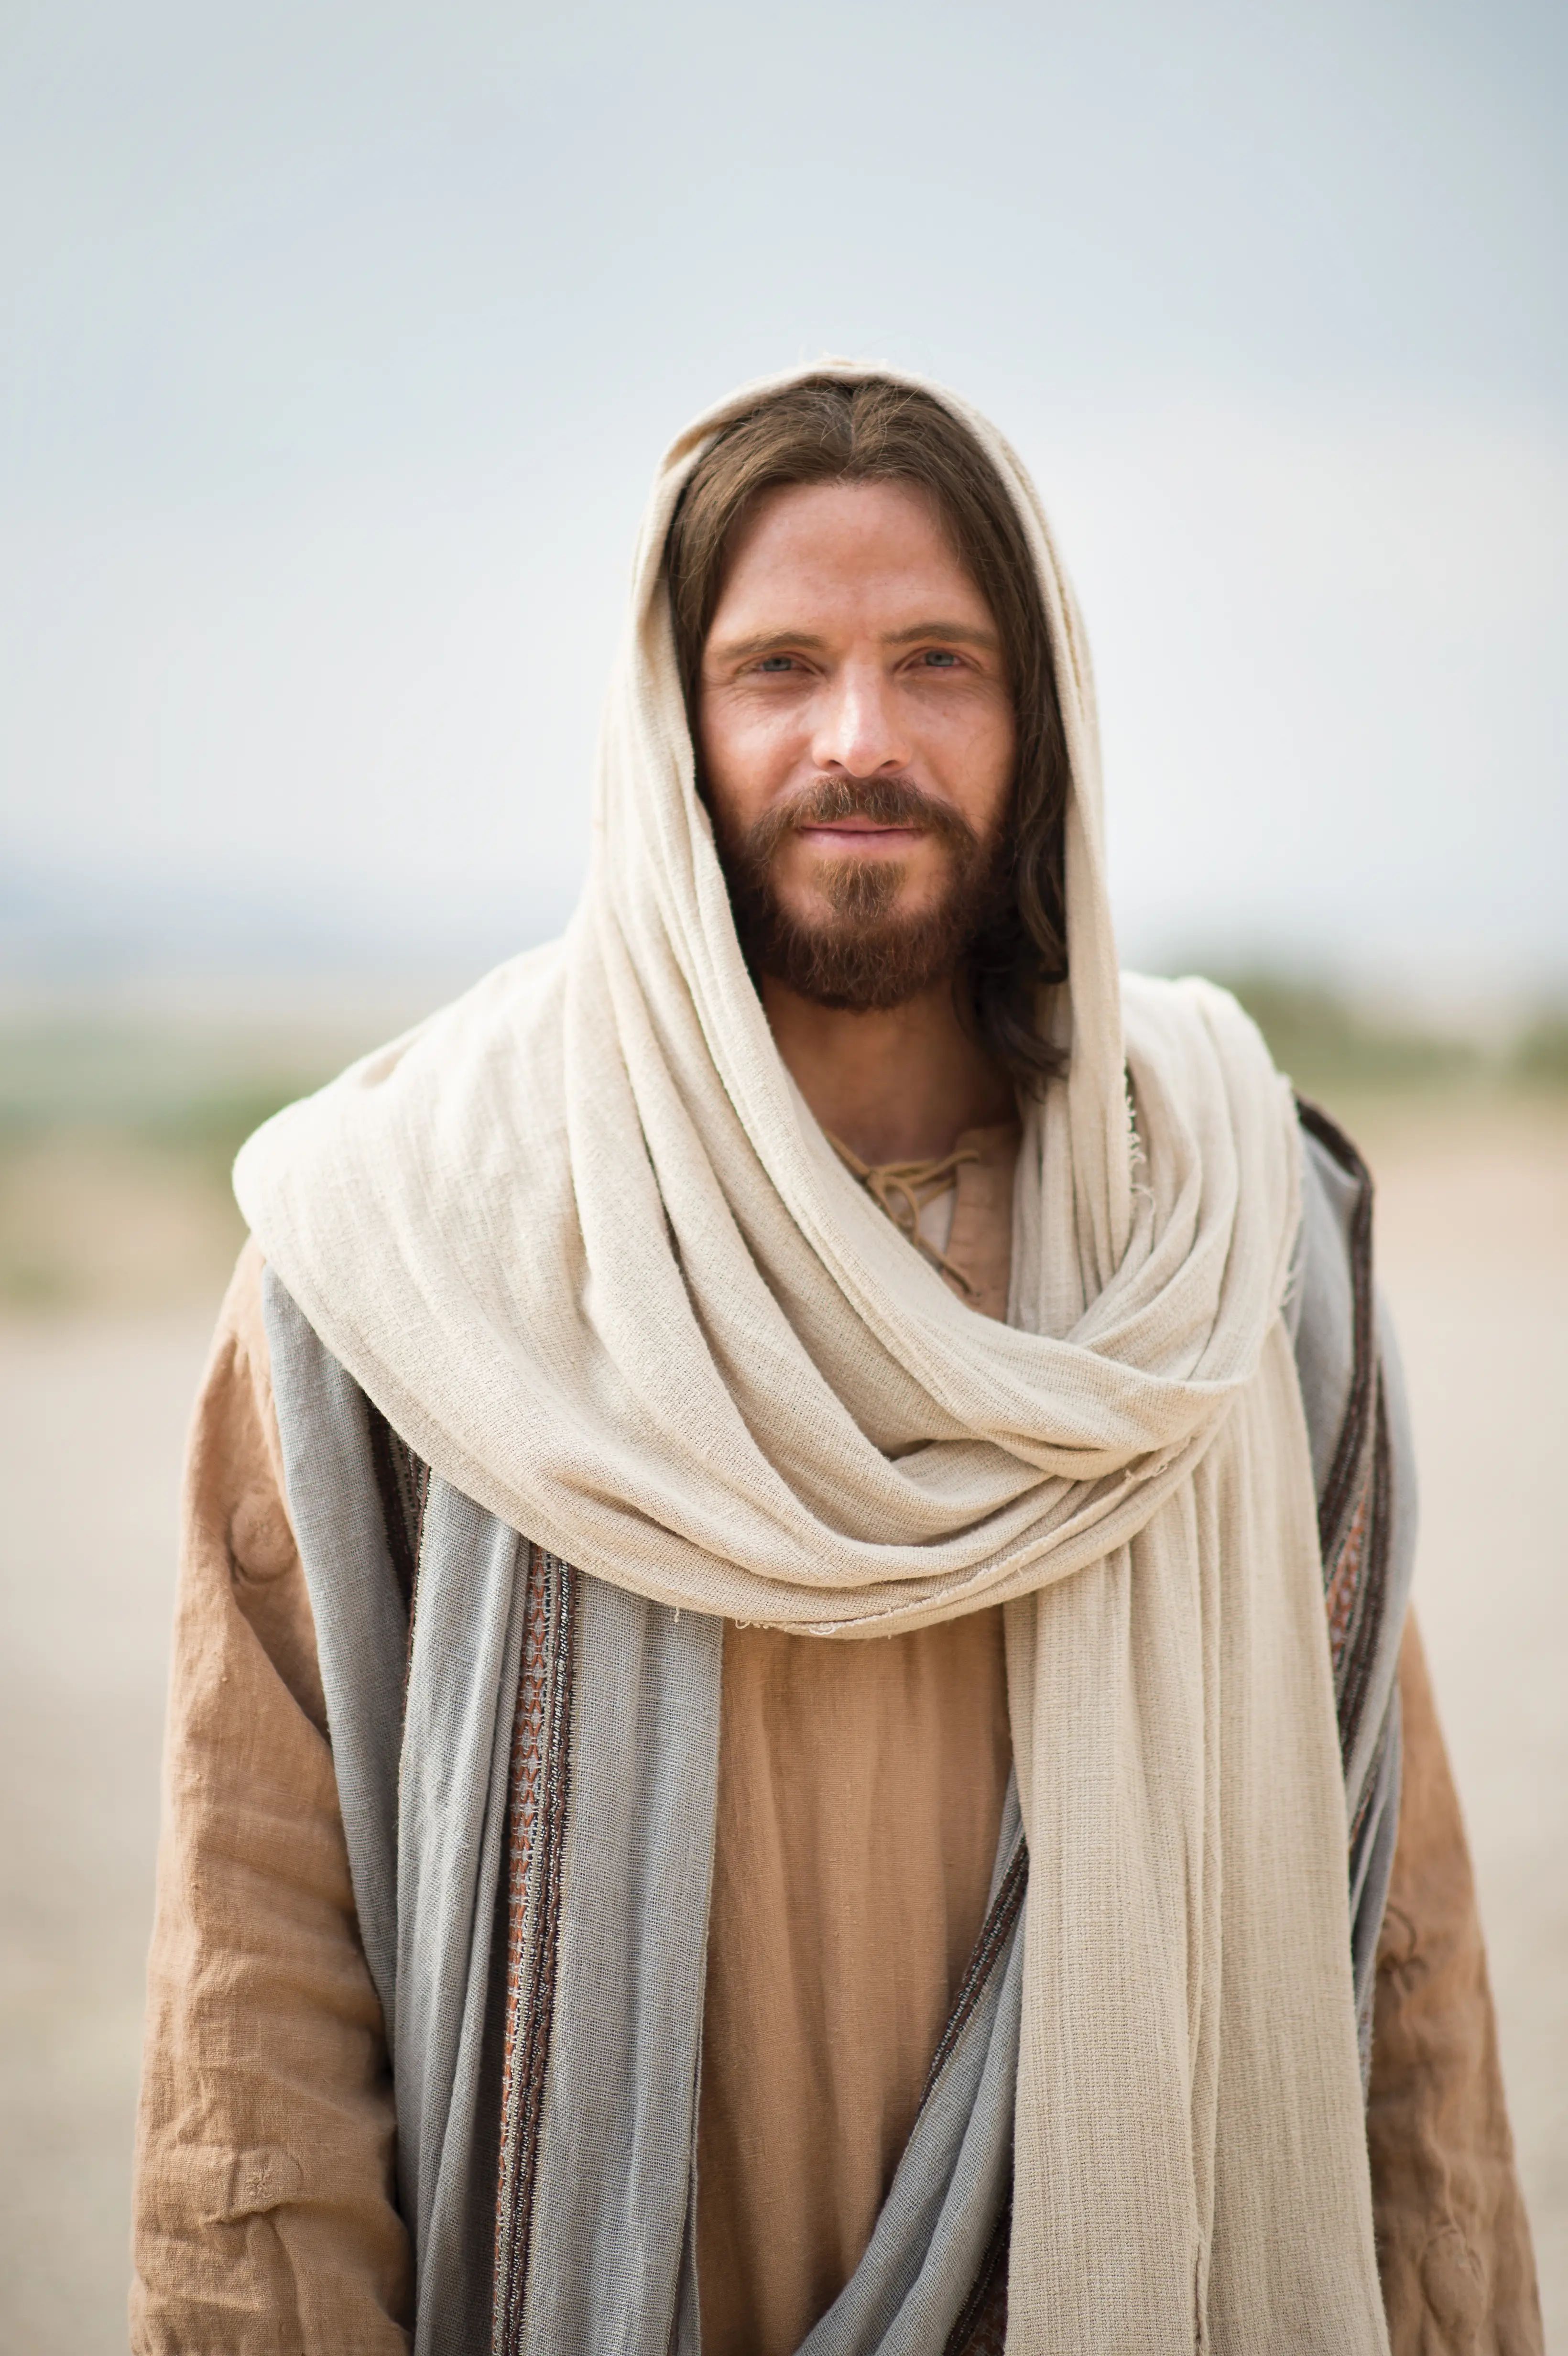 Portrait of Jesus Christ standing alone and smiling.